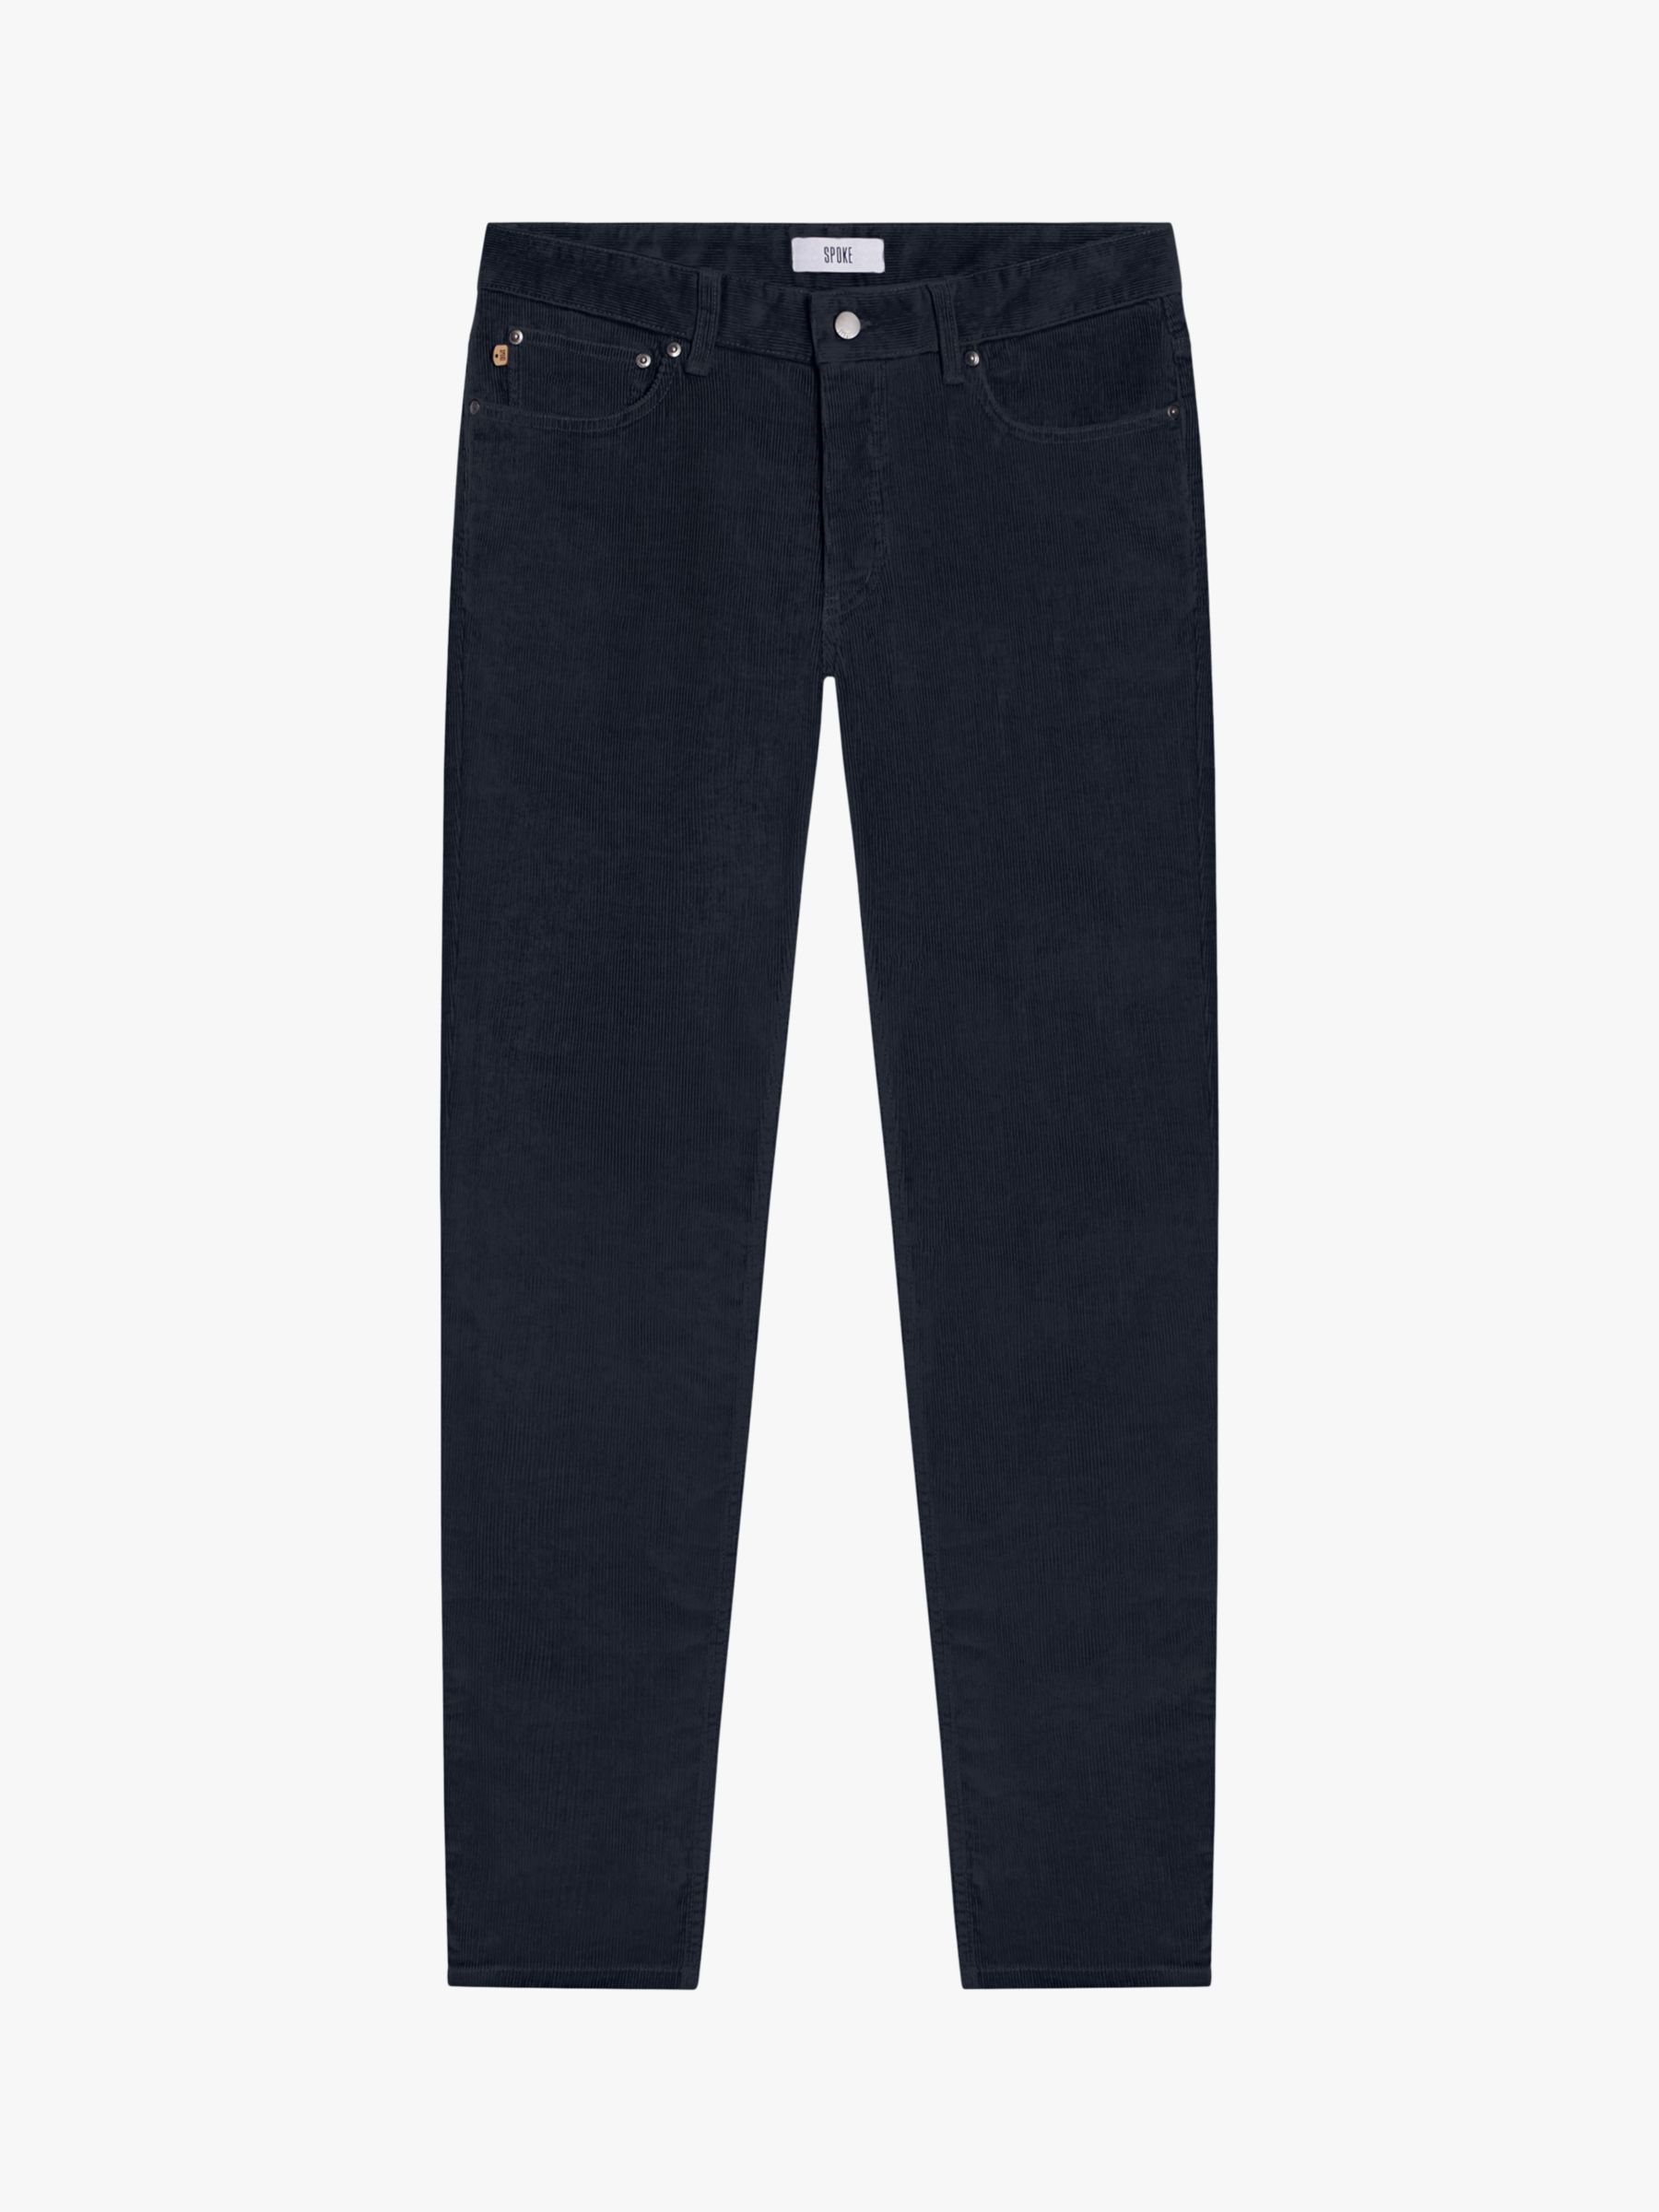 Buy SPOKE Fives Build A Slim Thigh Corduroy Trousers Online at johnlewis.com